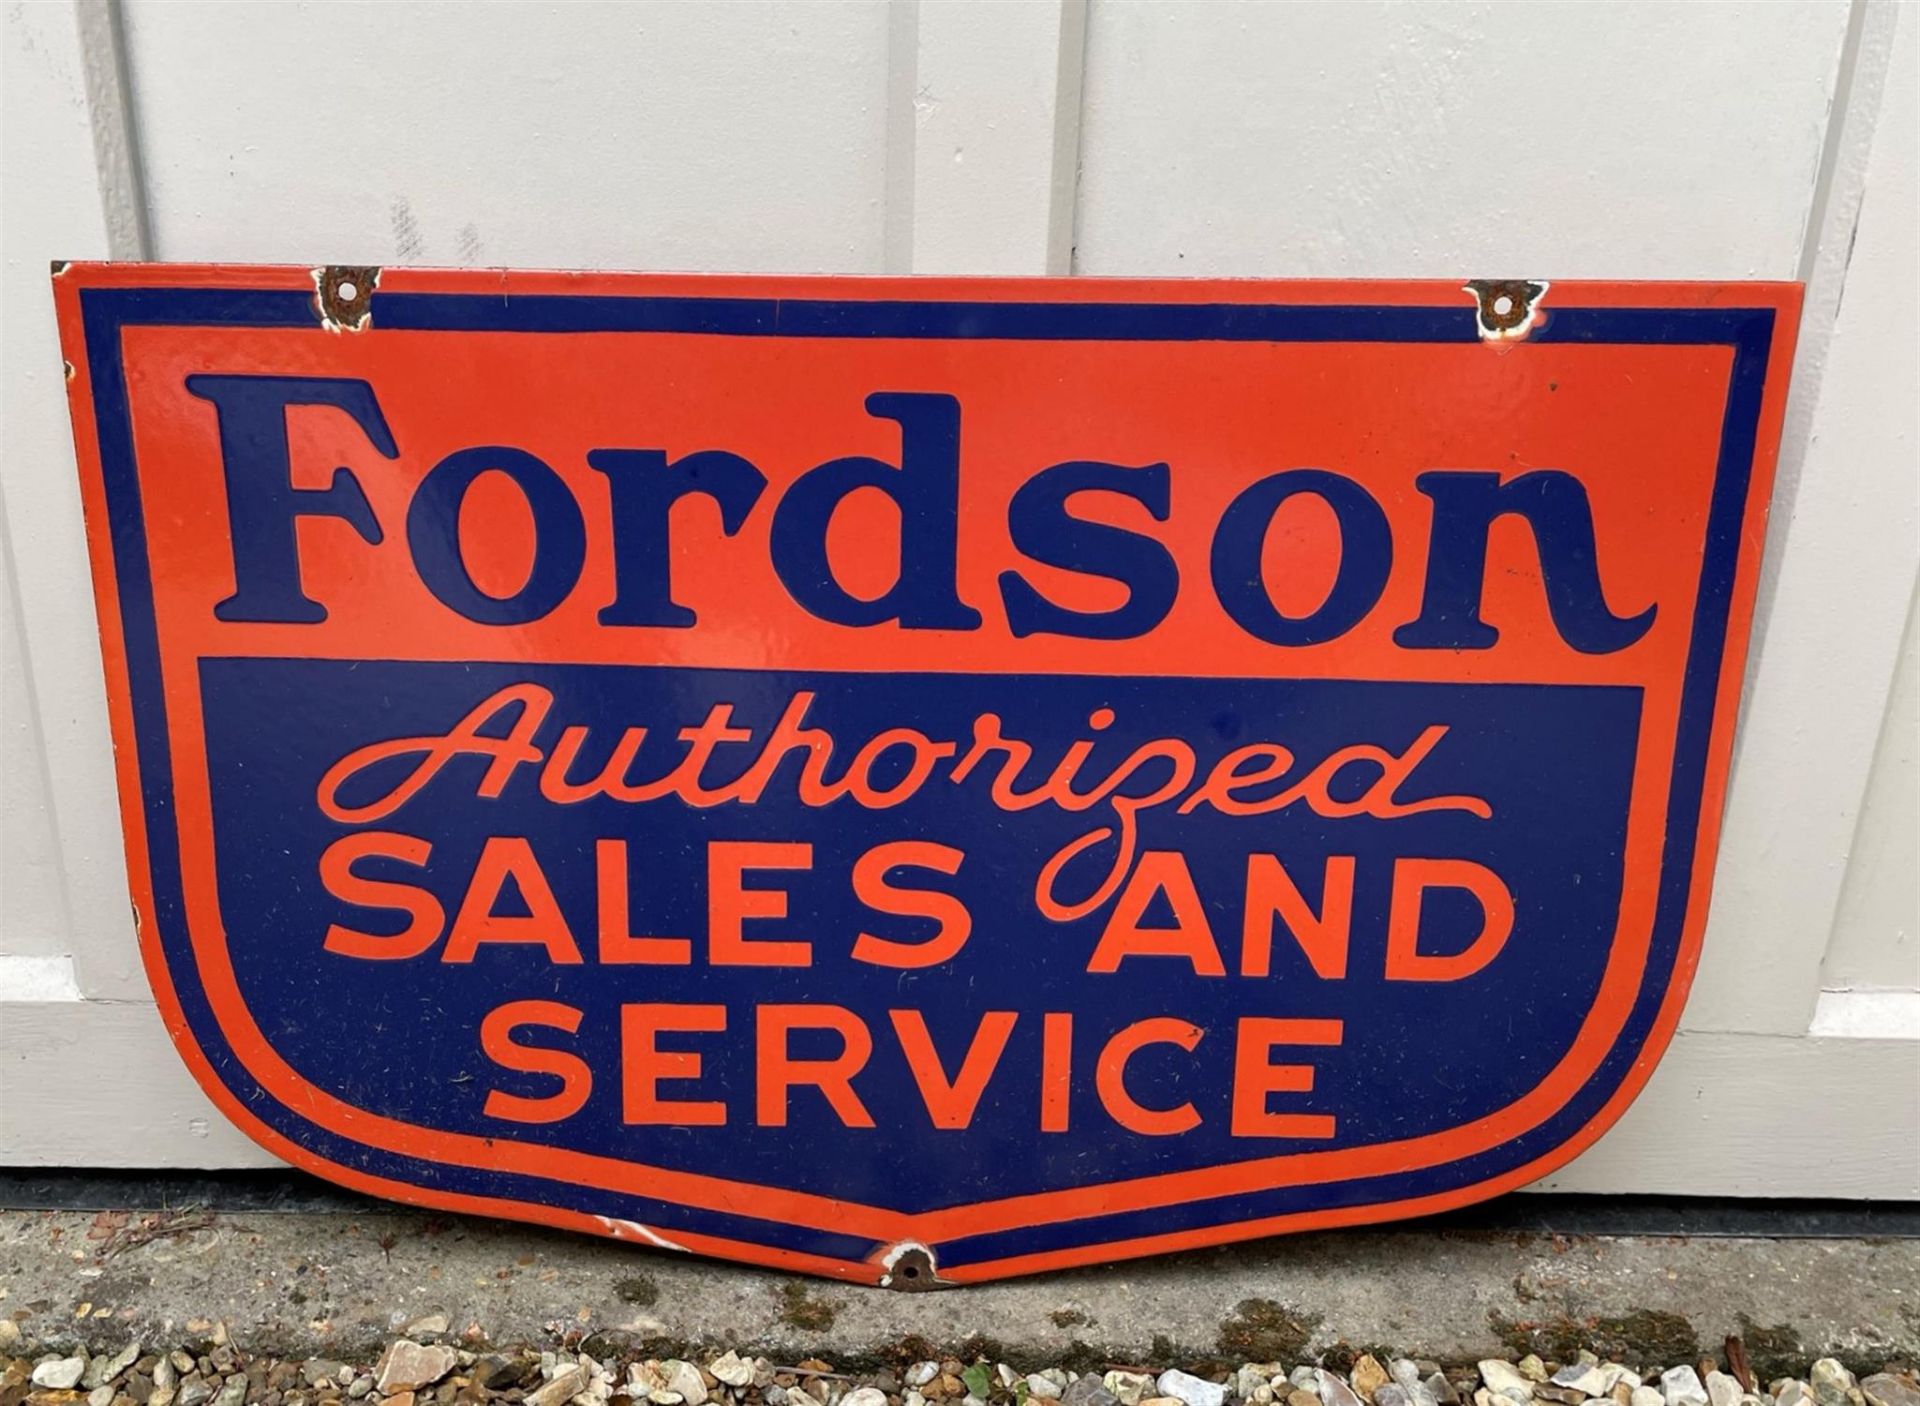 Fordson Sales and Service Contemporary Enamel Sign - Image 3 of 5